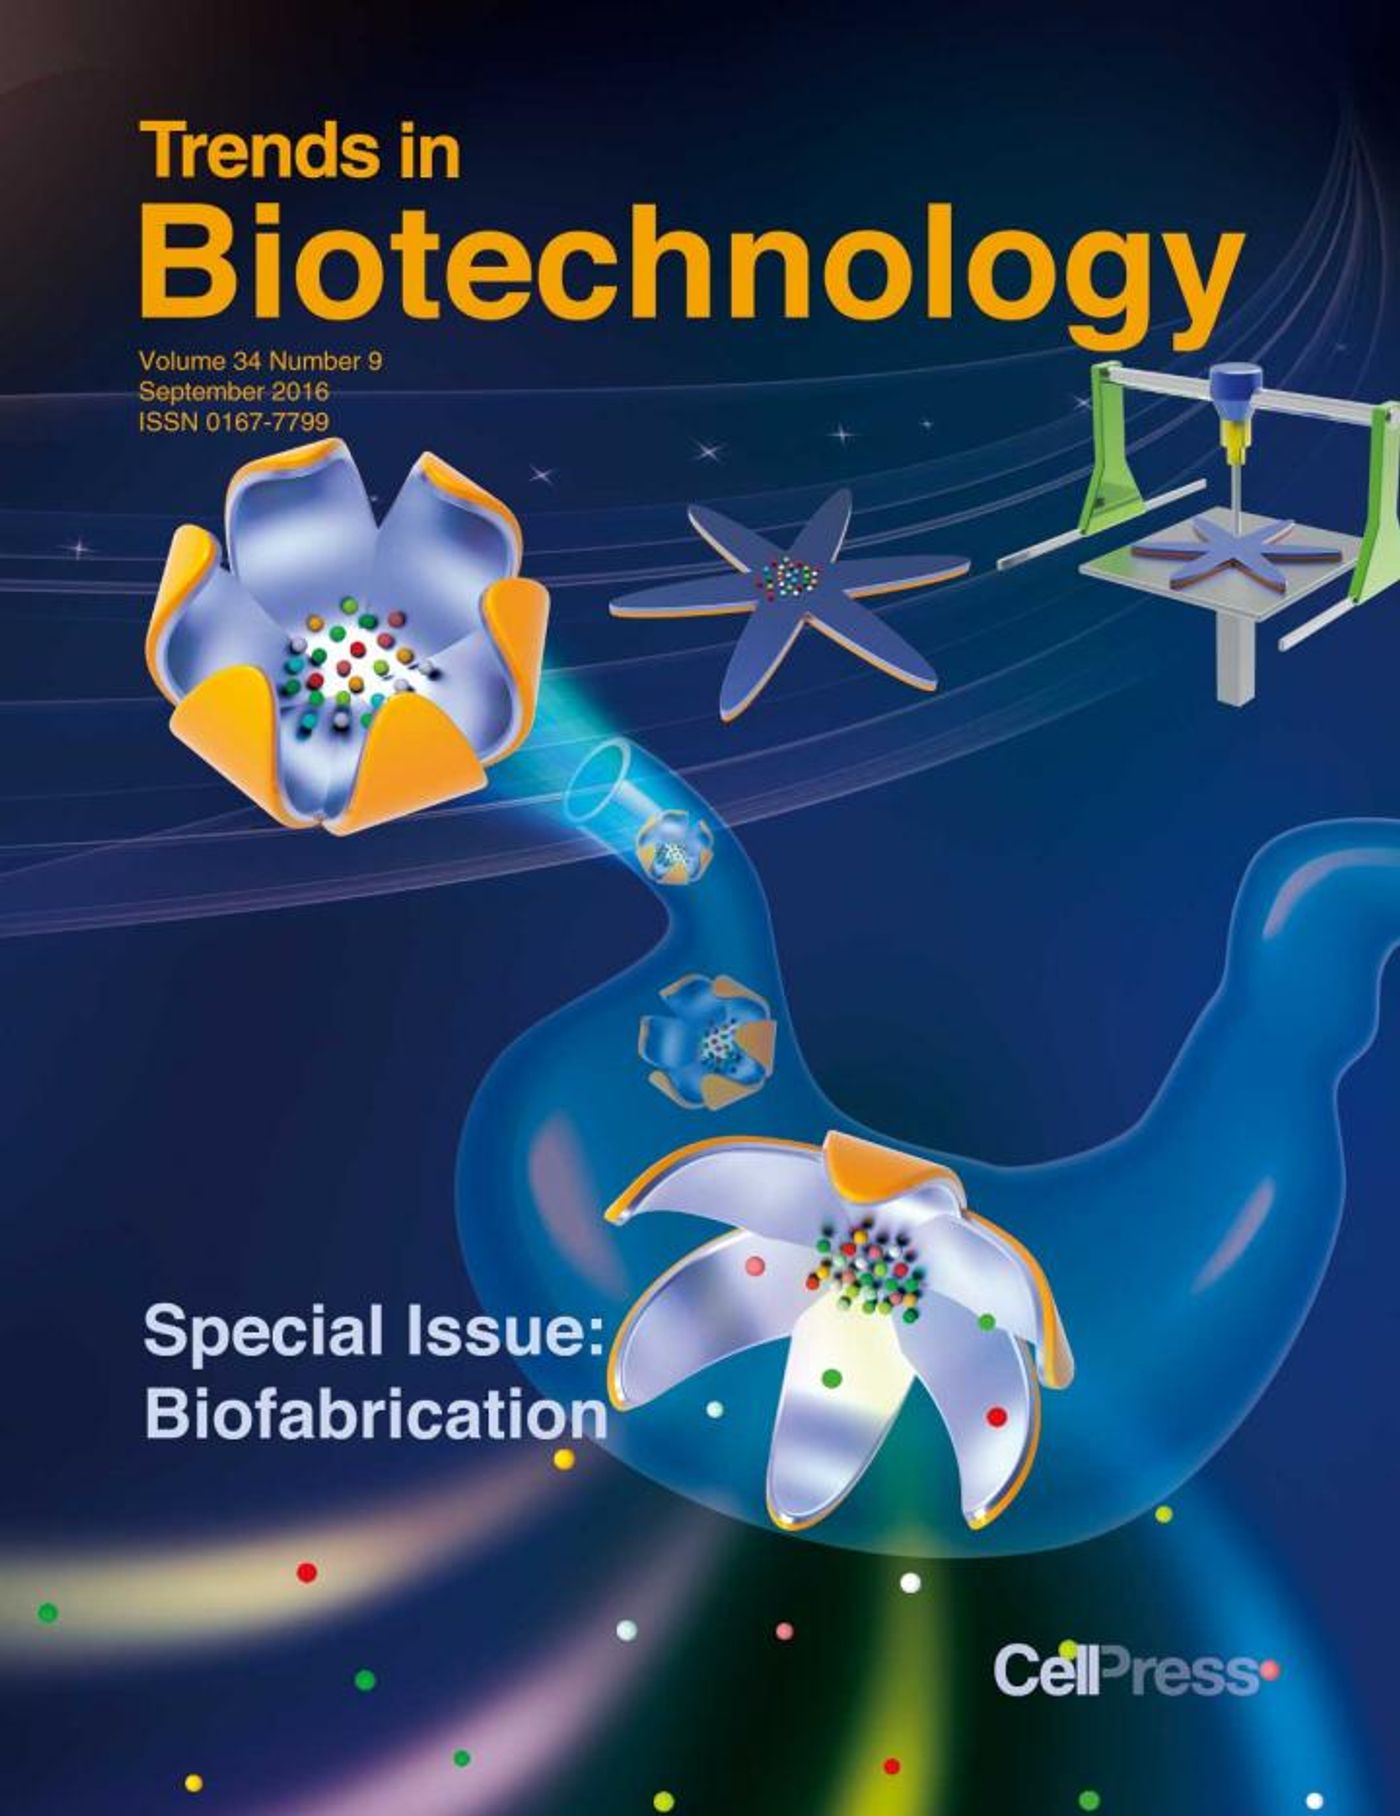 The cover of Trends in Biotechnology's special issue on biofabrication. / Credit: Cover image from Feng Xu and cover design by Matthew Pavlovich.